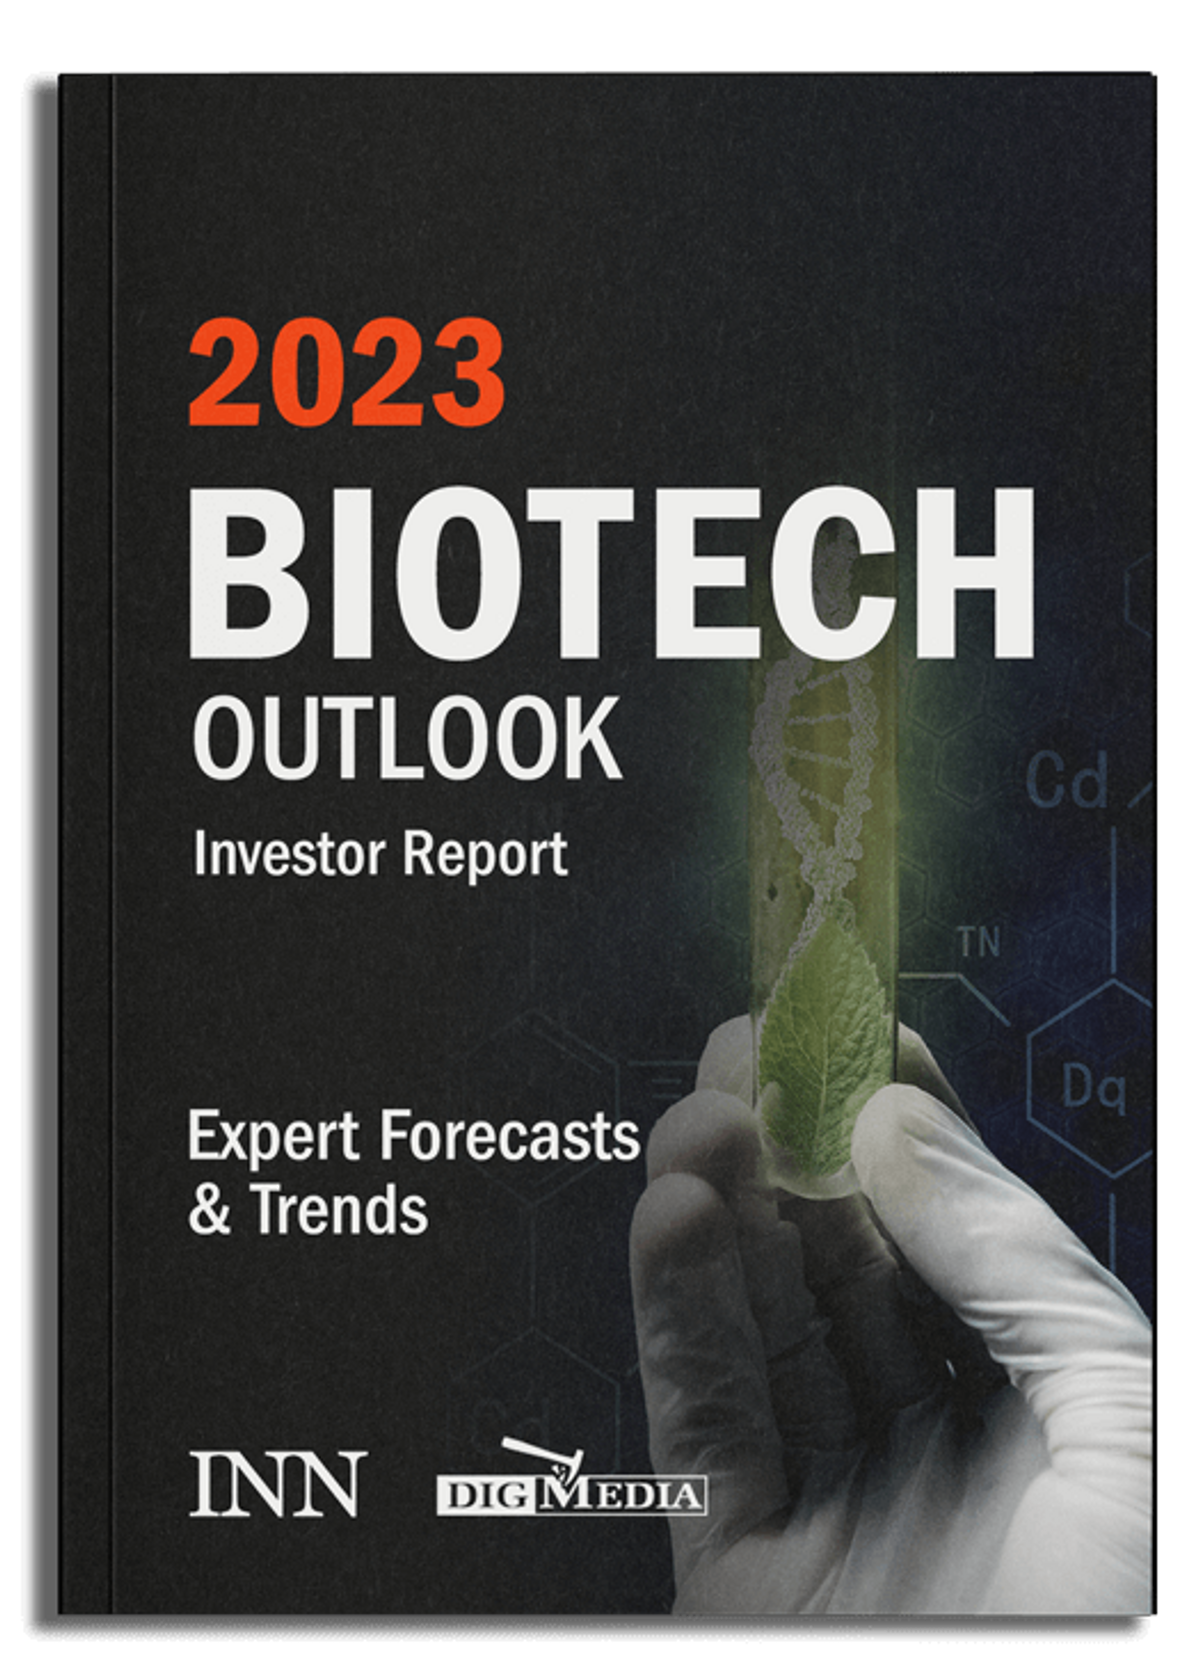 NEW! 2023 Biotech Outlook Report.